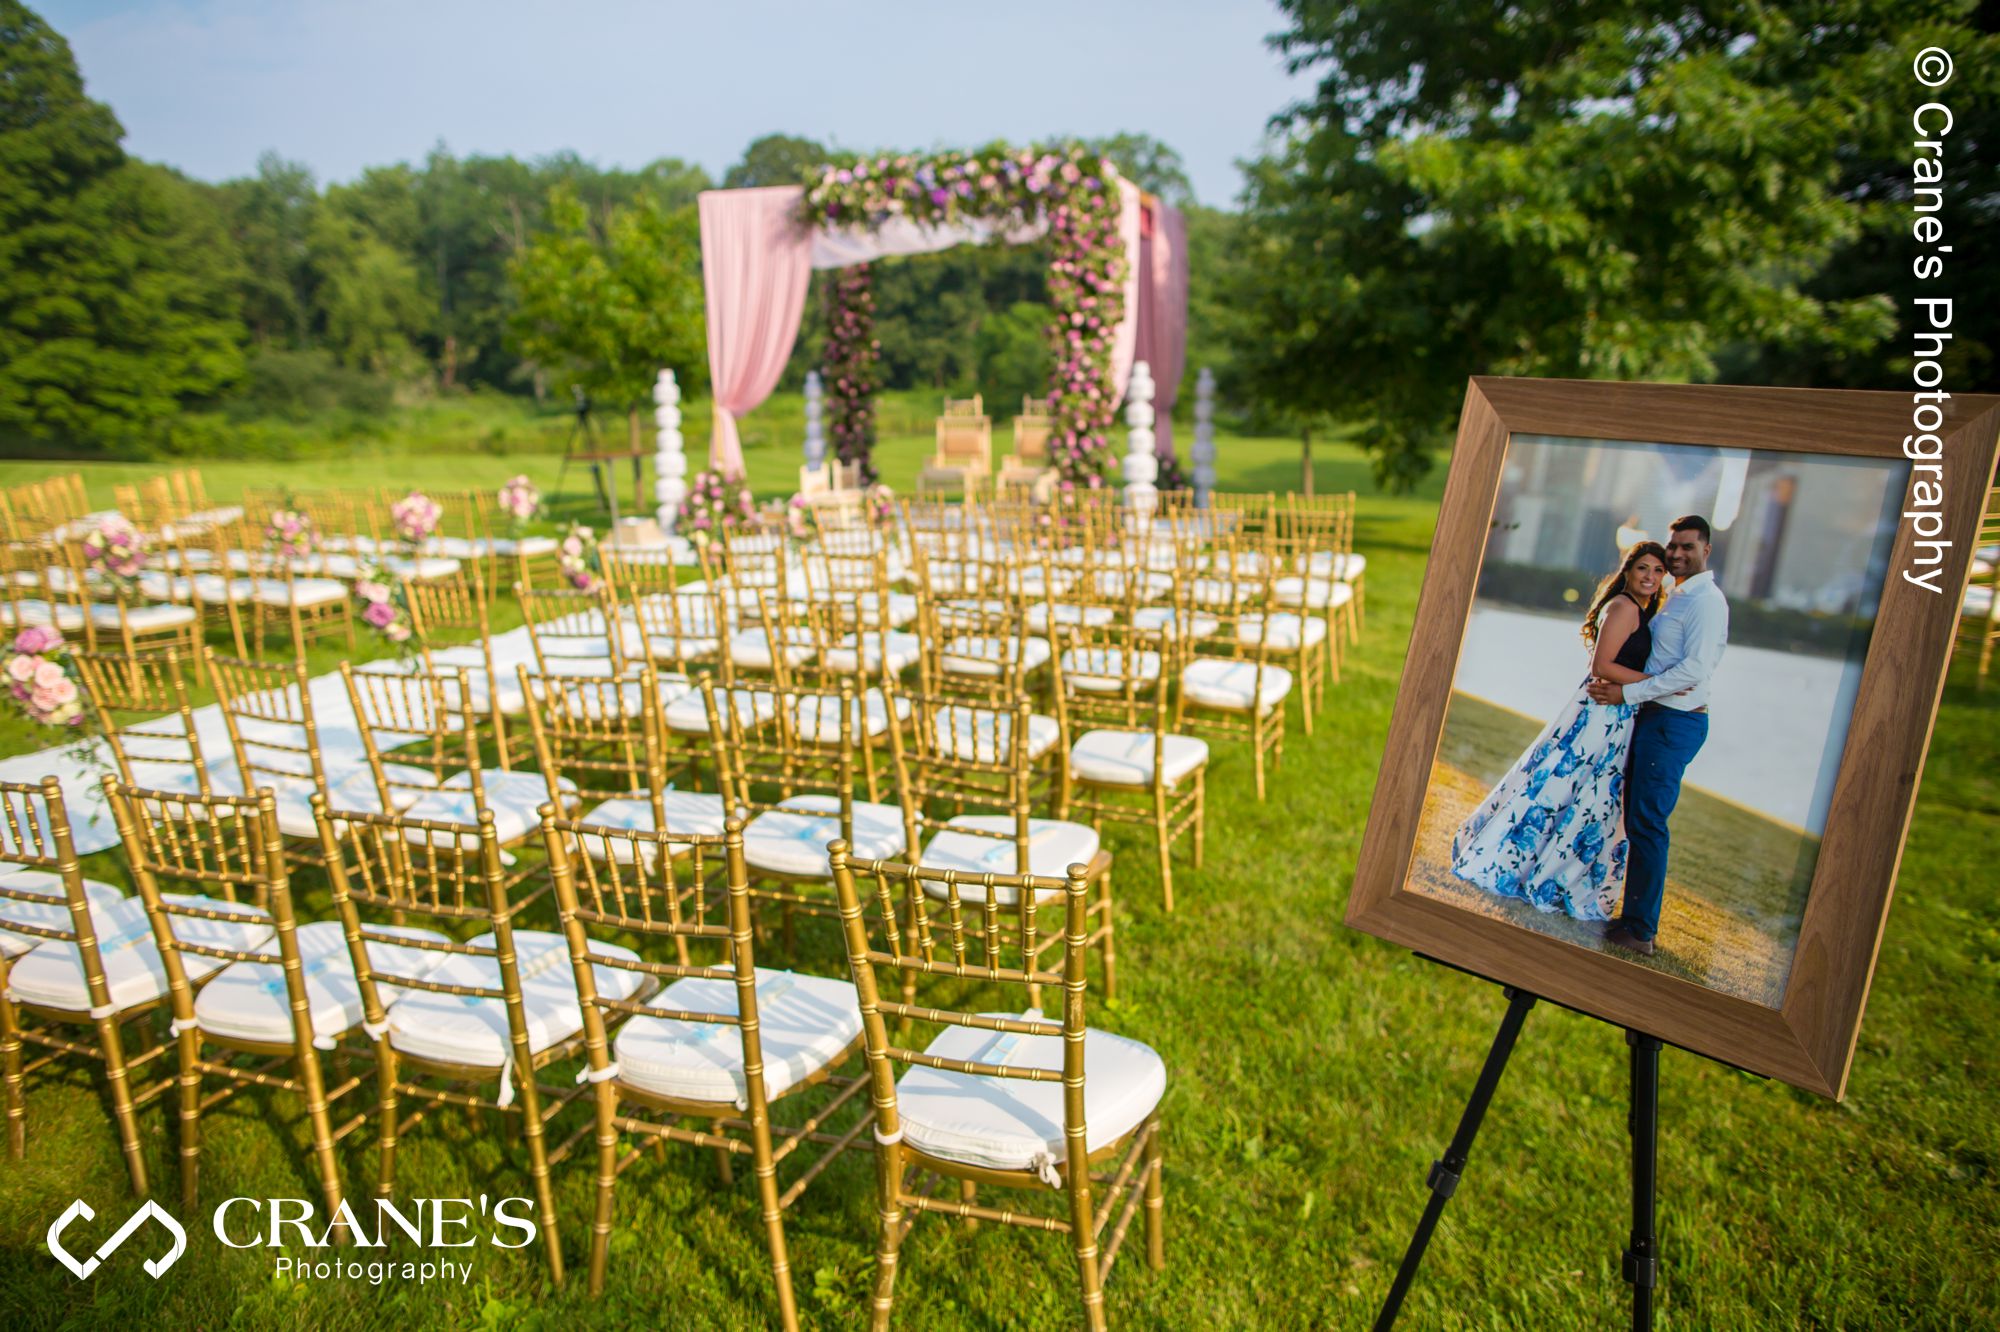 A printed engagement session photos displayed at an outdoor Indian wedding ceremony site.